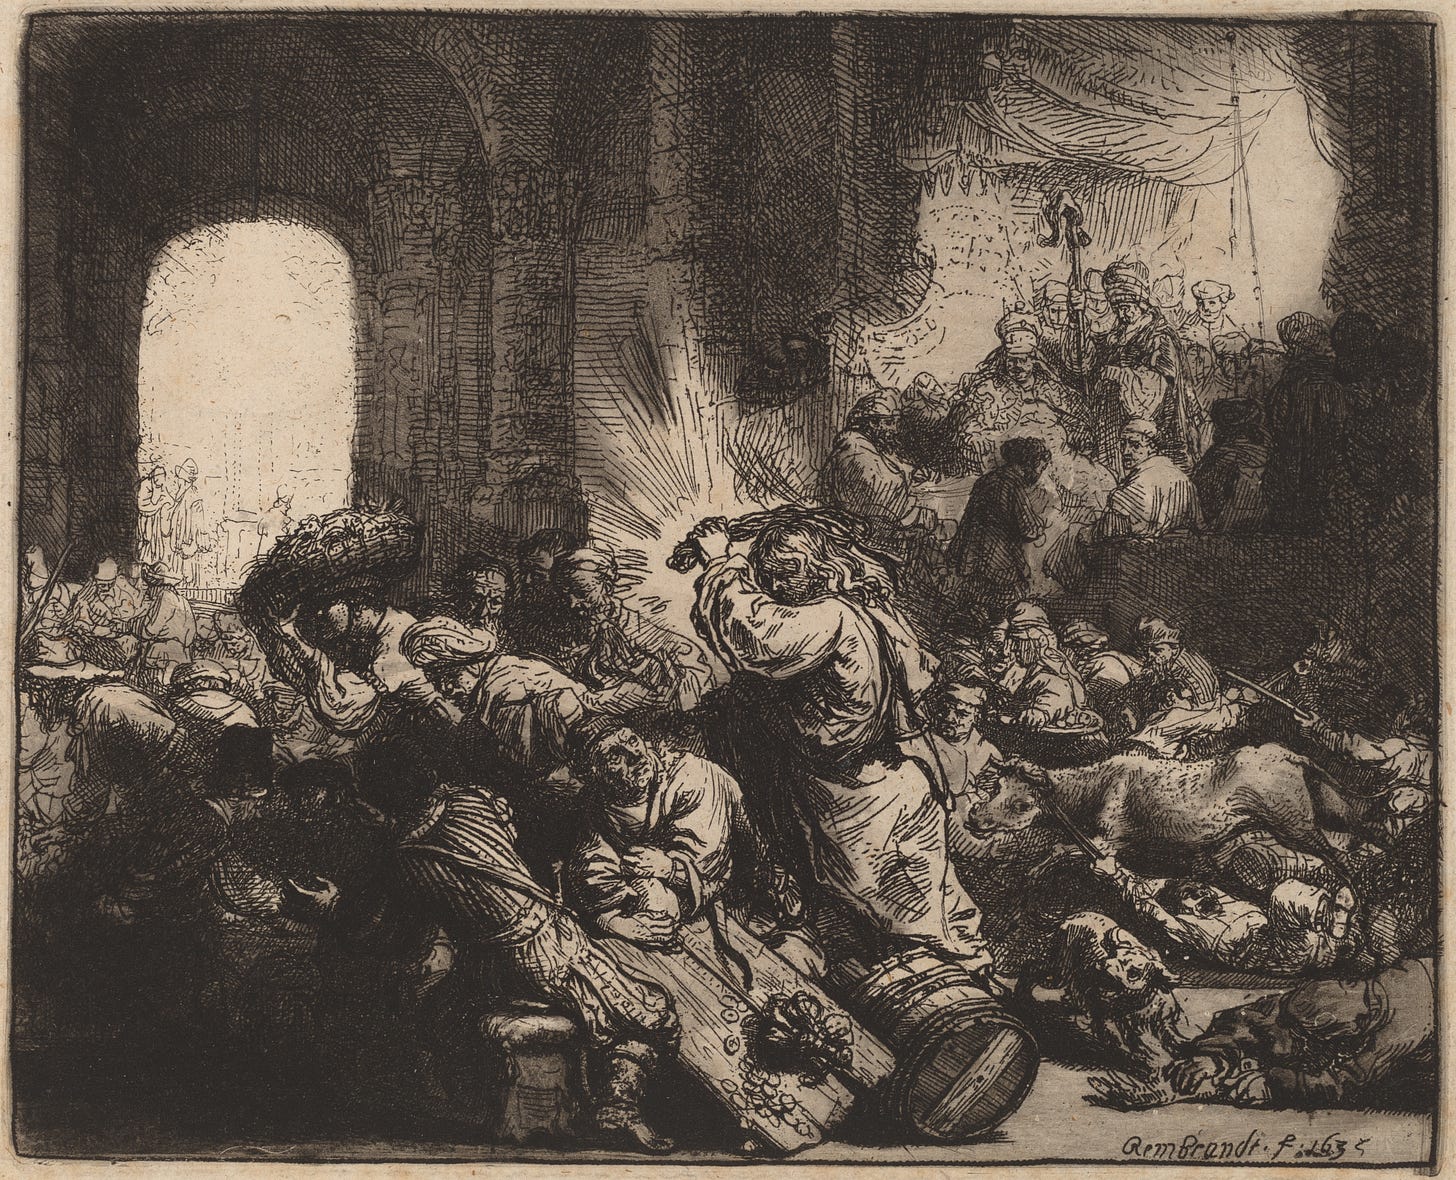 File:Rembrandt van Rijn, Christ Driving the Money Changers from the Temple,  1635, NGA 9891.jpg - Wikimedia Commons